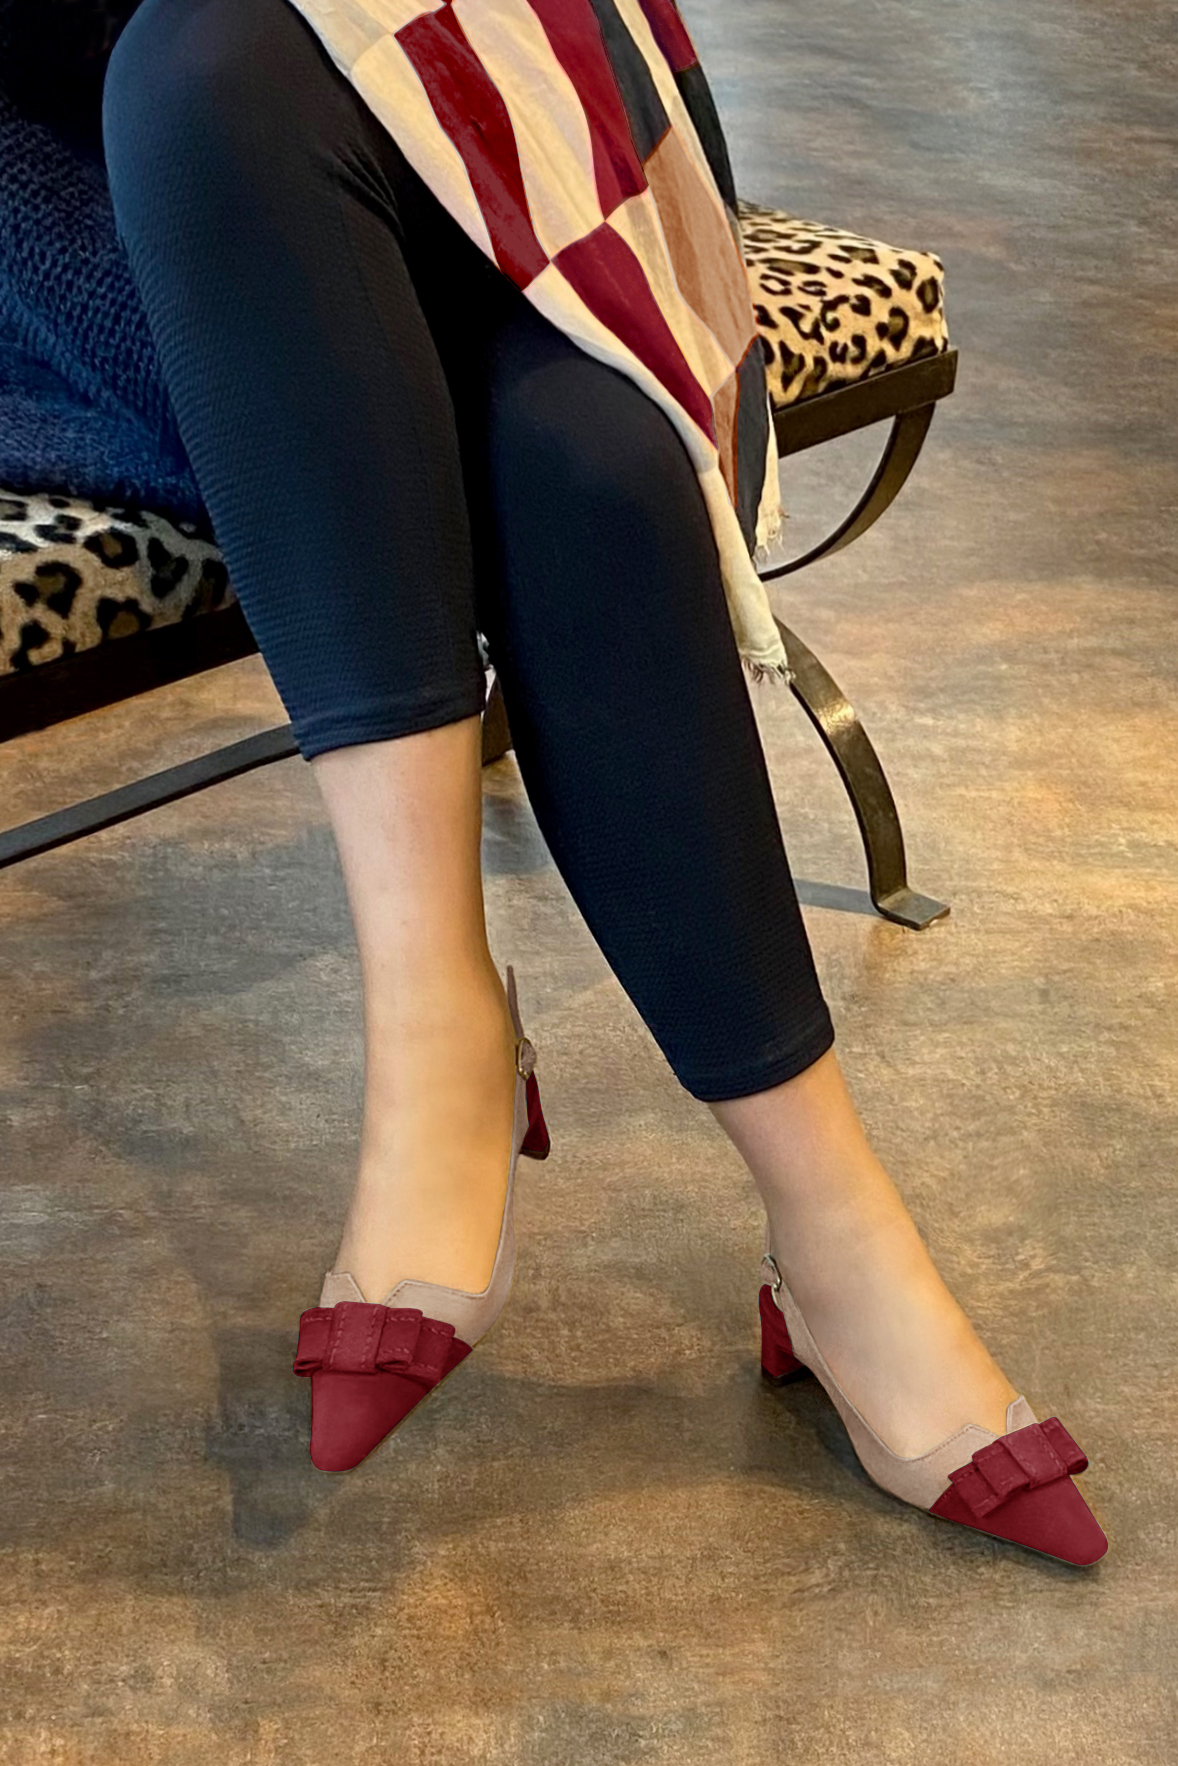 Burgundy red and tan beige matching shoes, clutch and . Worn view - Florence KOOIJMAN